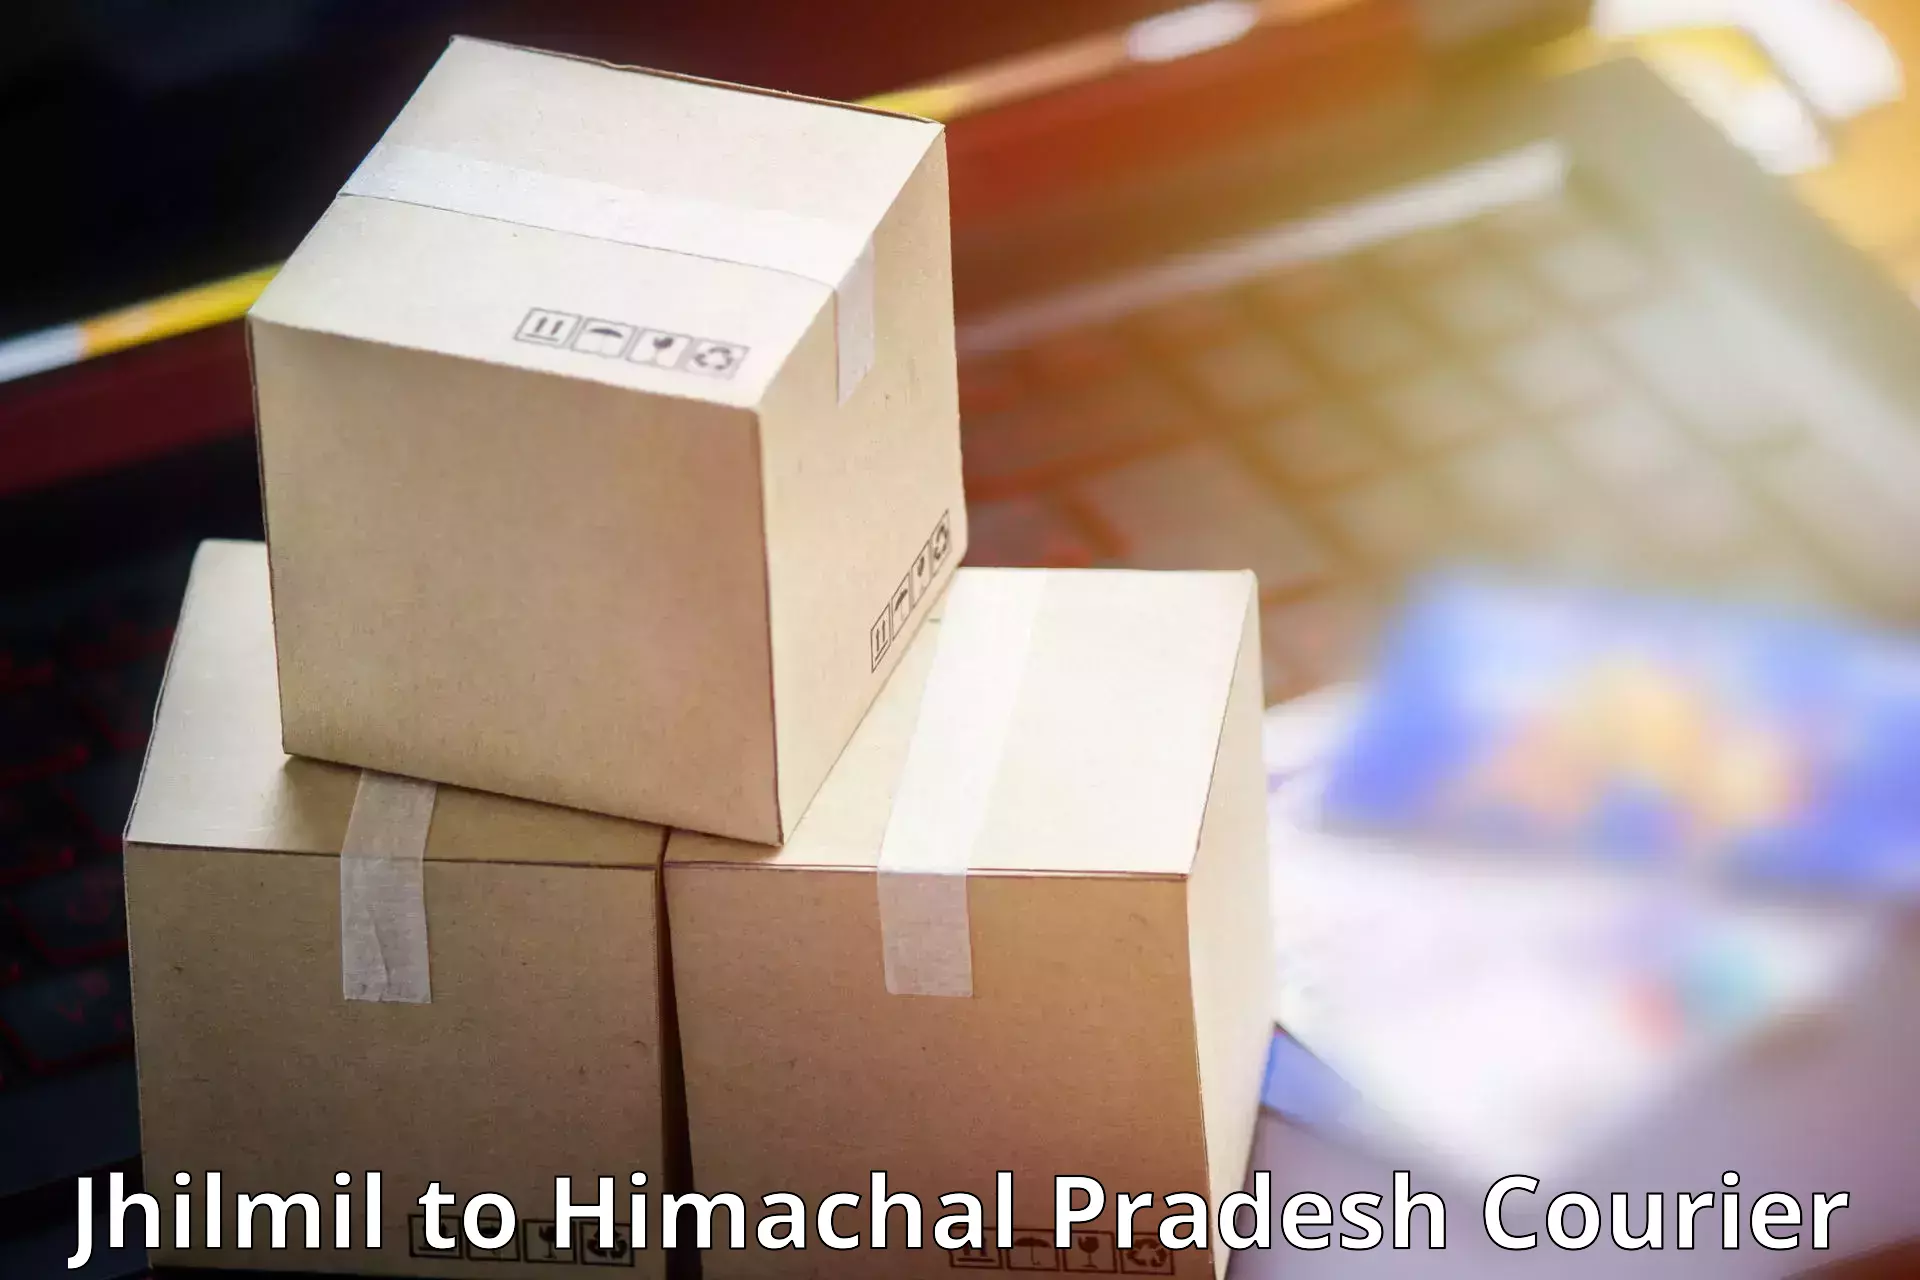 Customizable delivery plans Jhilmil to Kullu